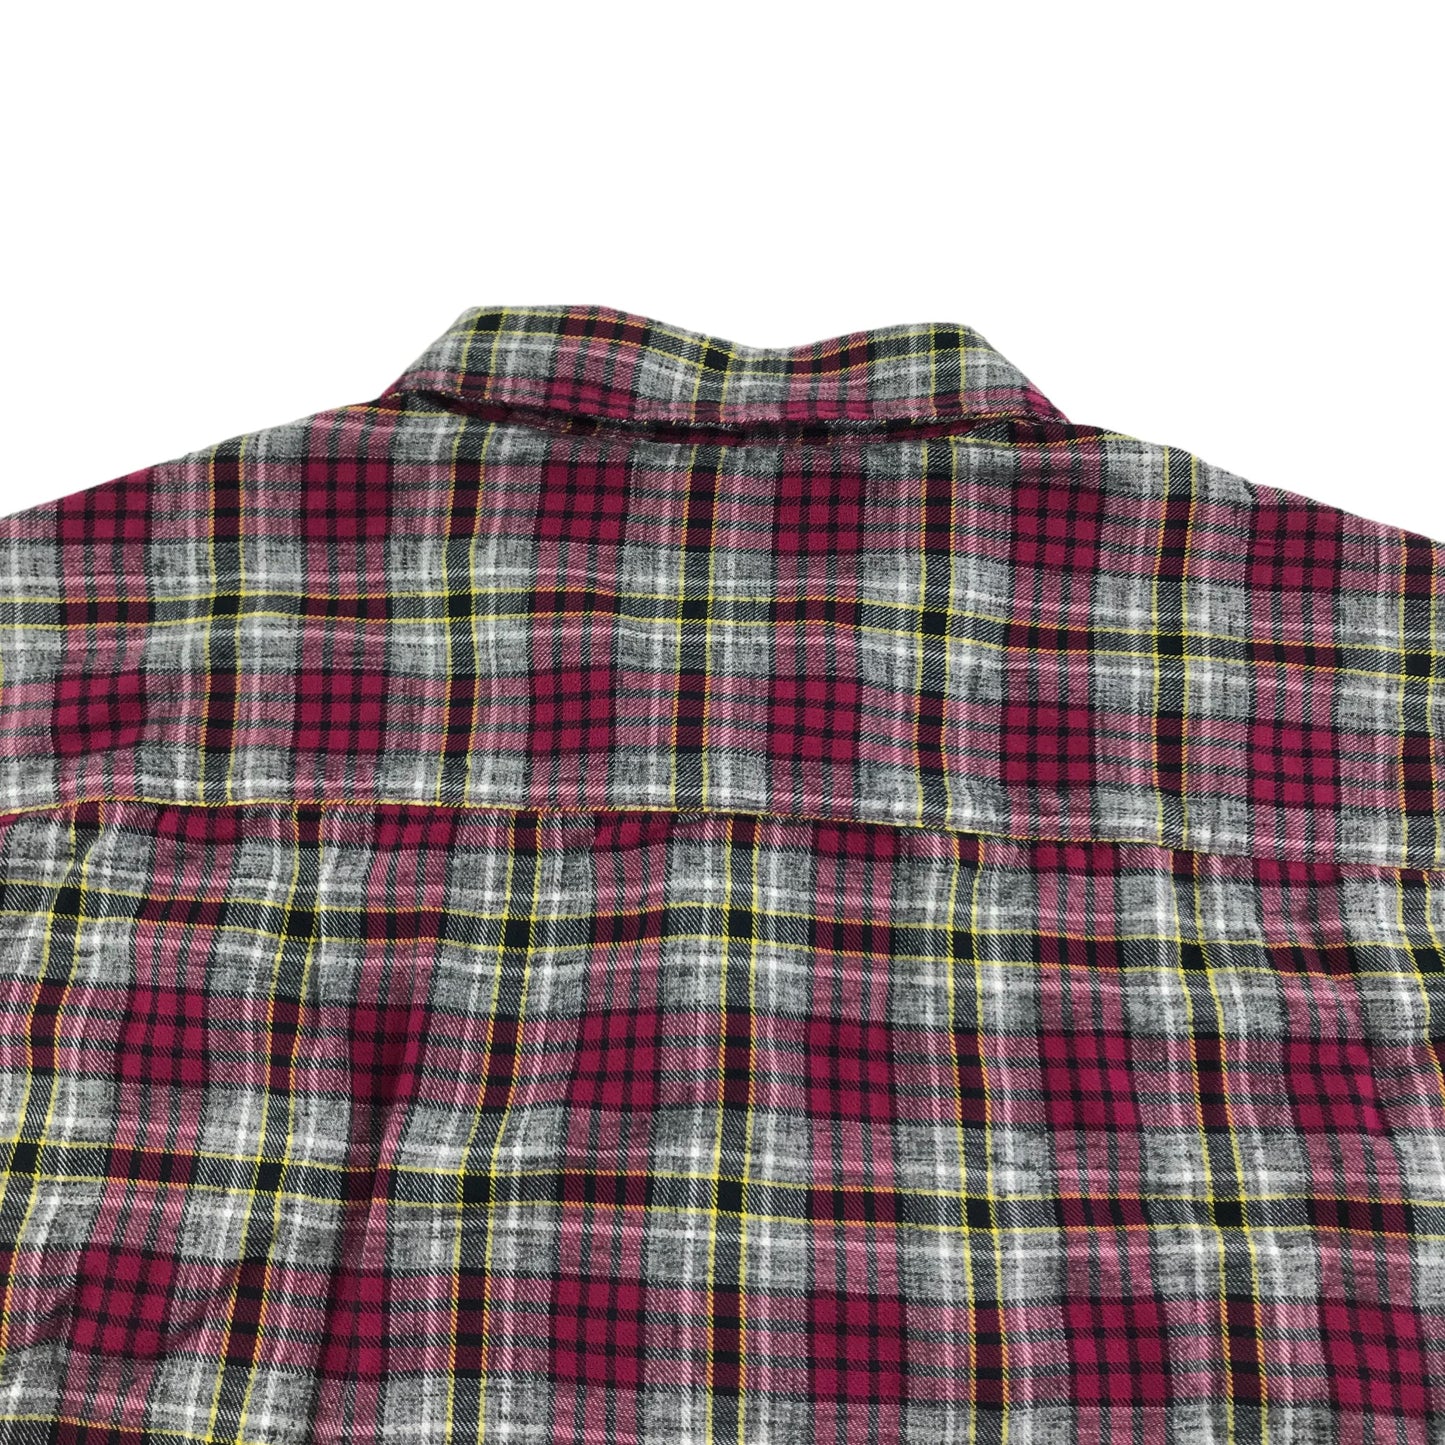 Benetton Shirt Size S Red Checked Long Sleeve Button Up